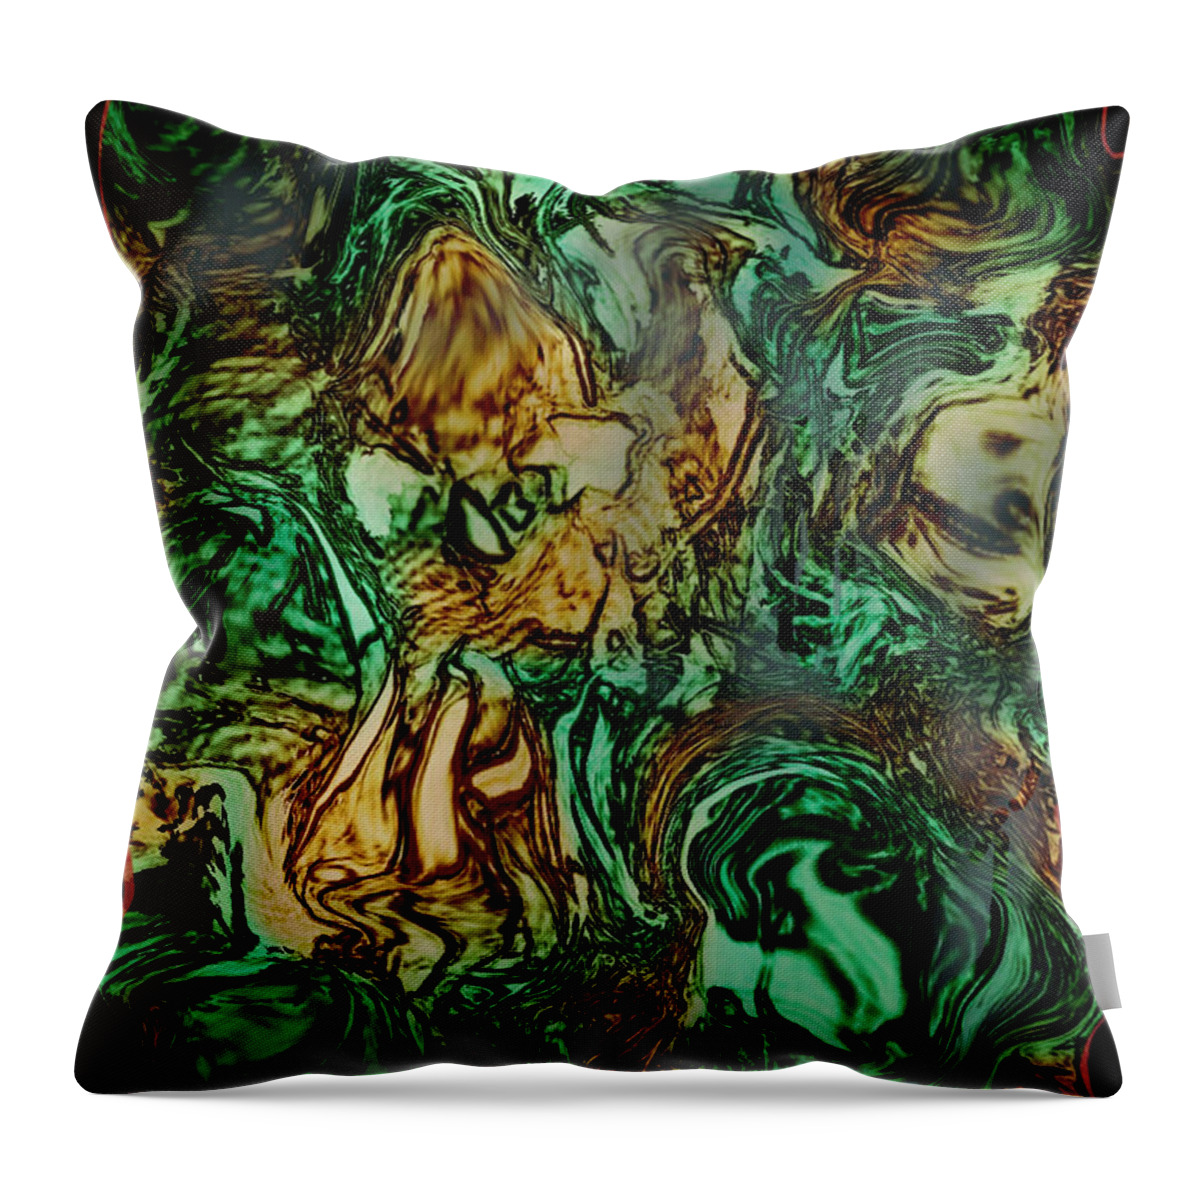 Abstract Throw Pillow featuring the digital art Patches by Rindi Rehs